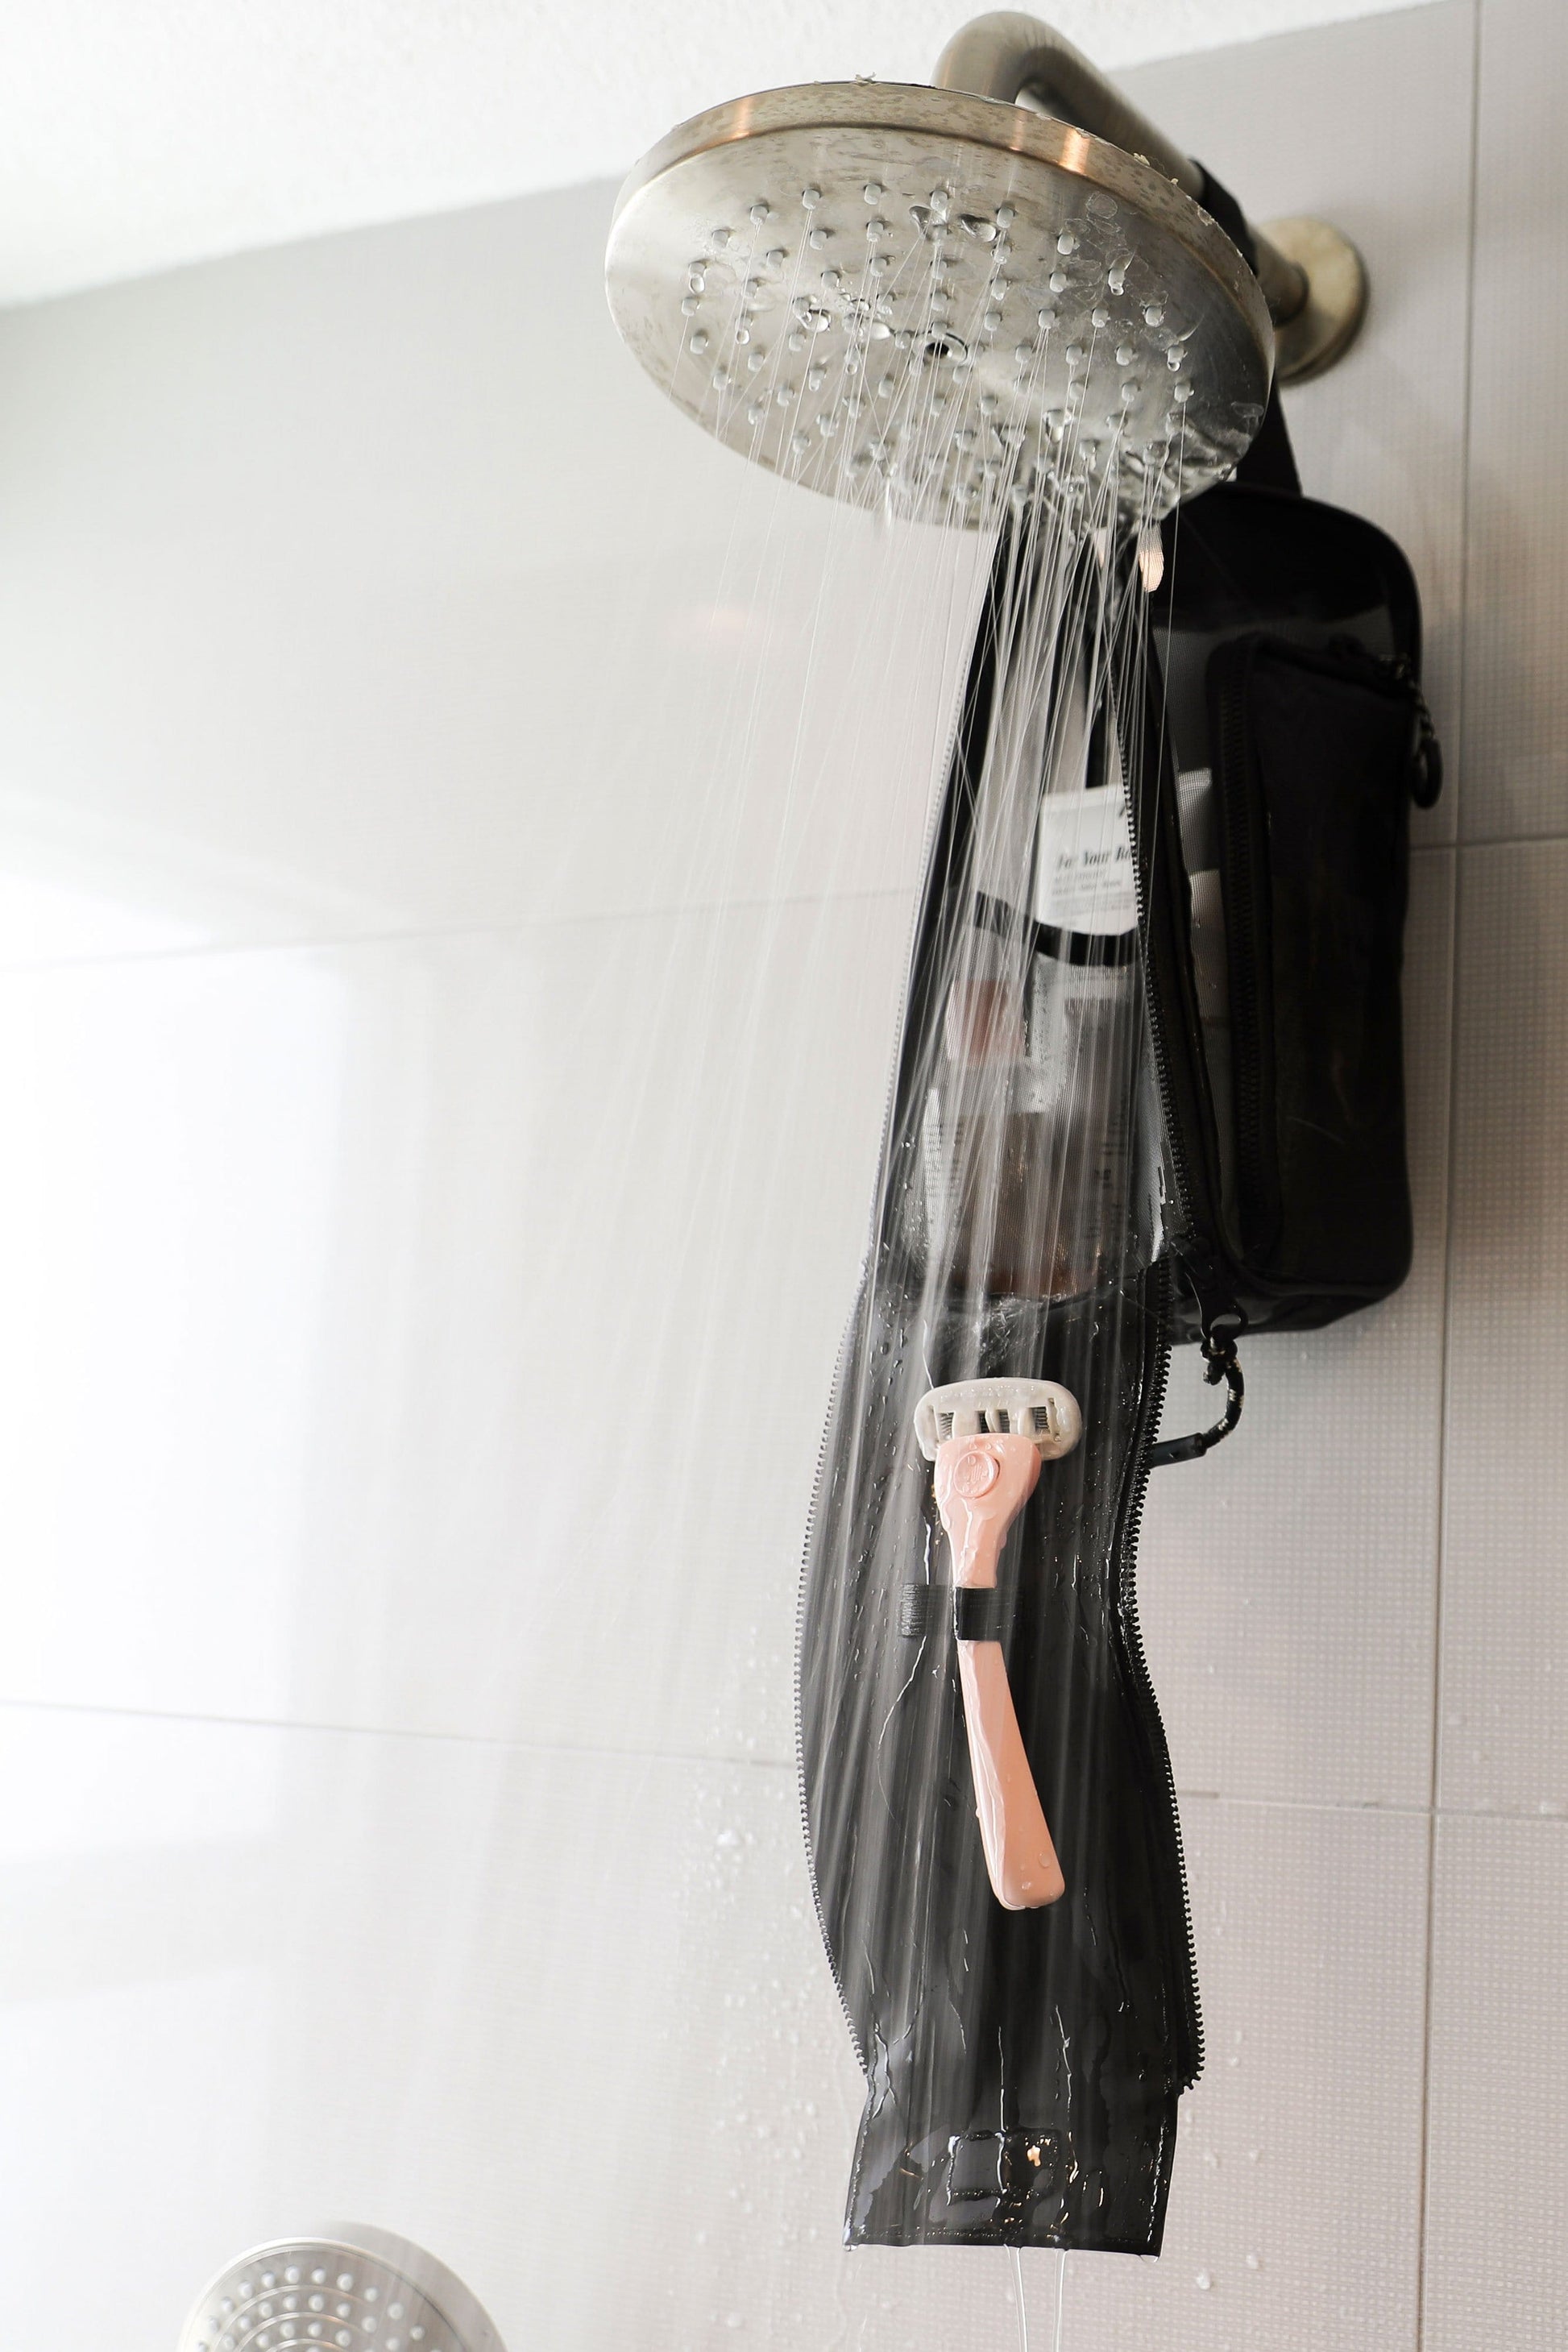 Hanging Shower Caddy Black in Shower with Razor 